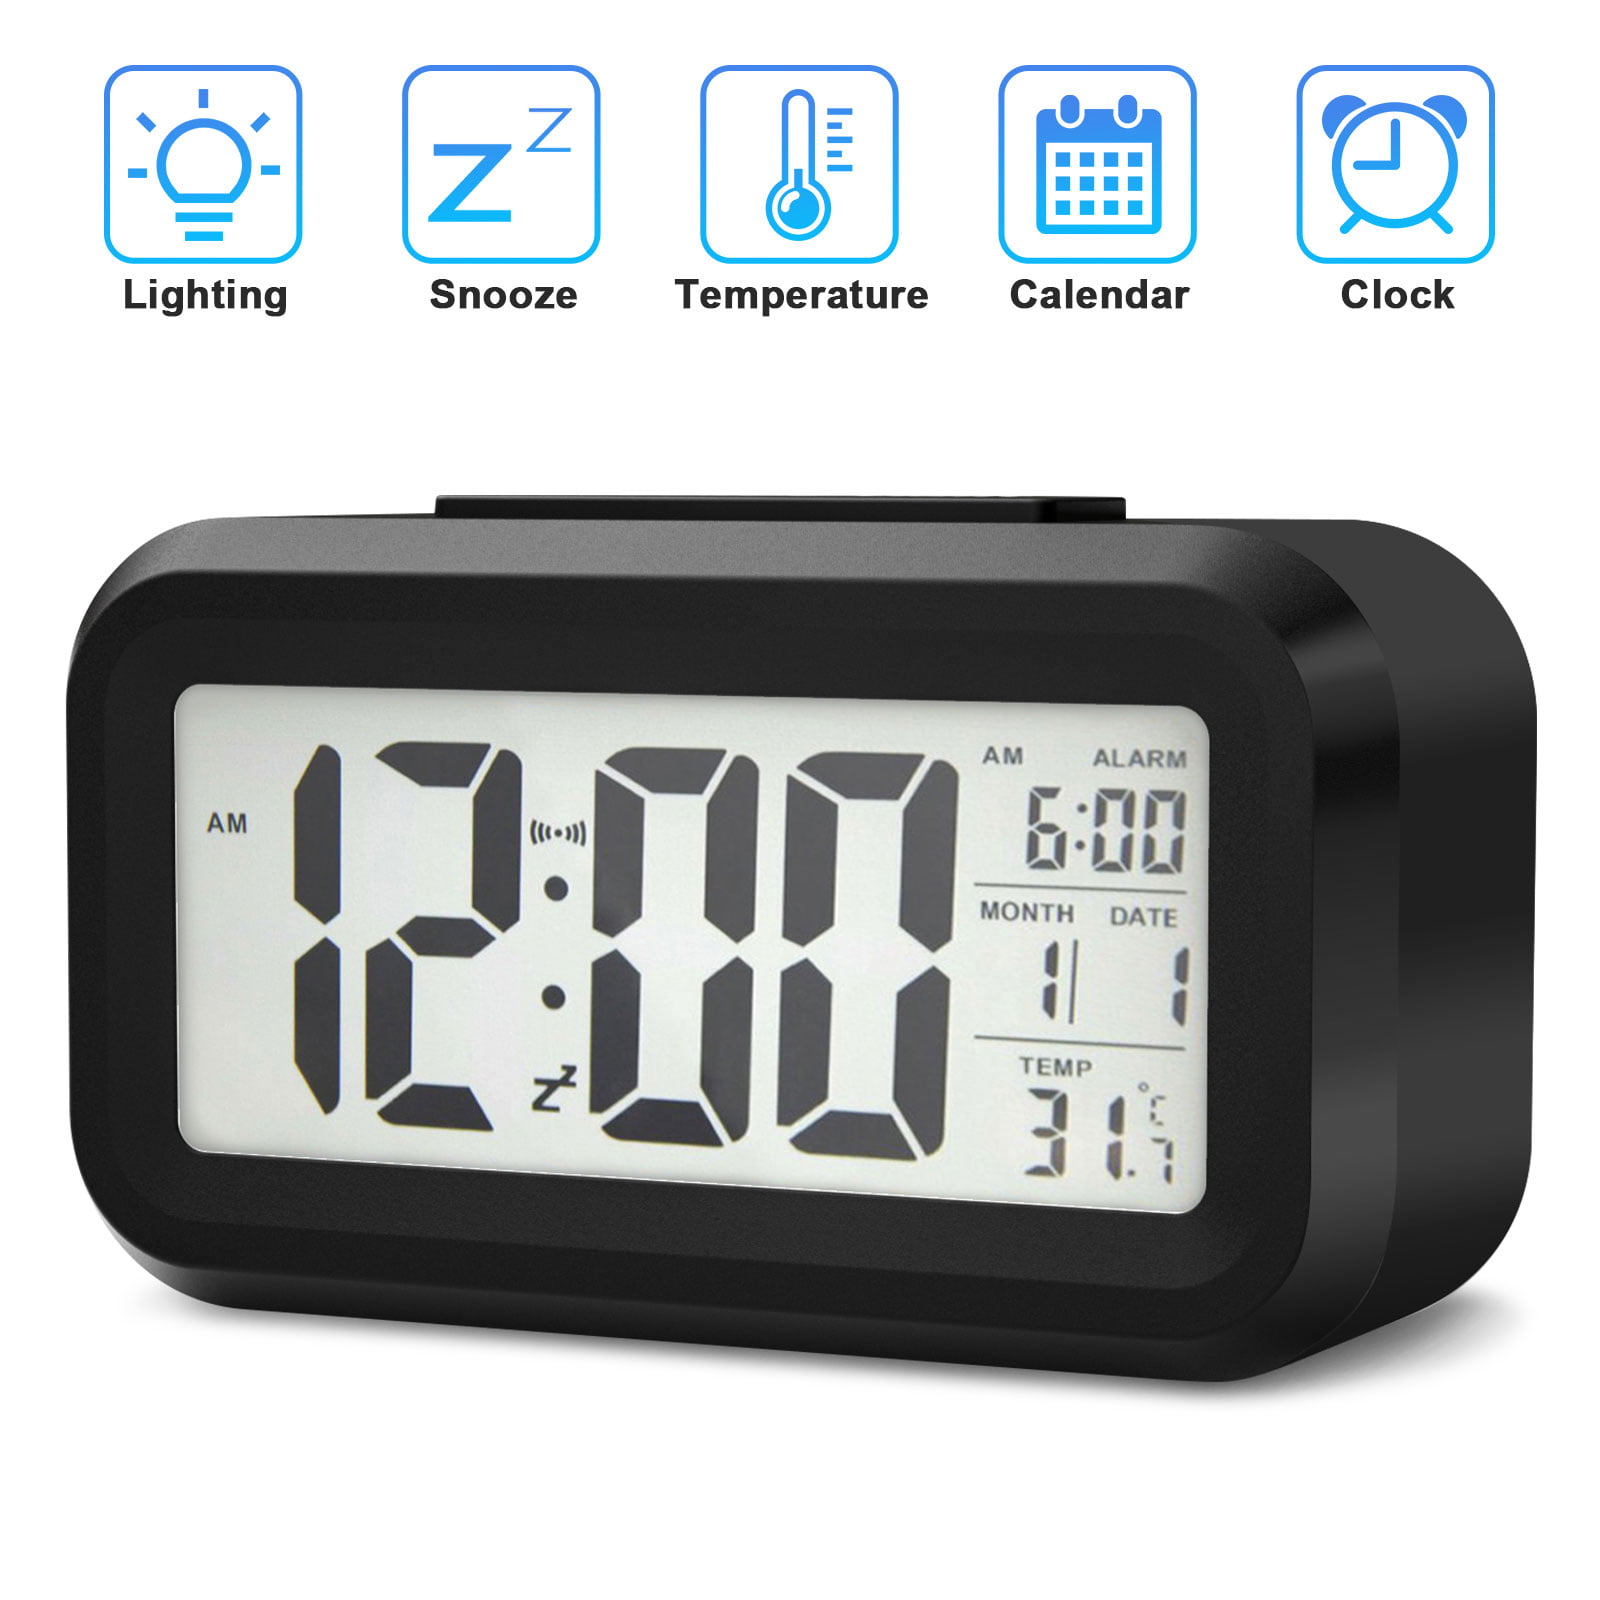 PETSOLA Digital Alarm Clock Blue Backlight With Snooze For Bedroom Time Date White